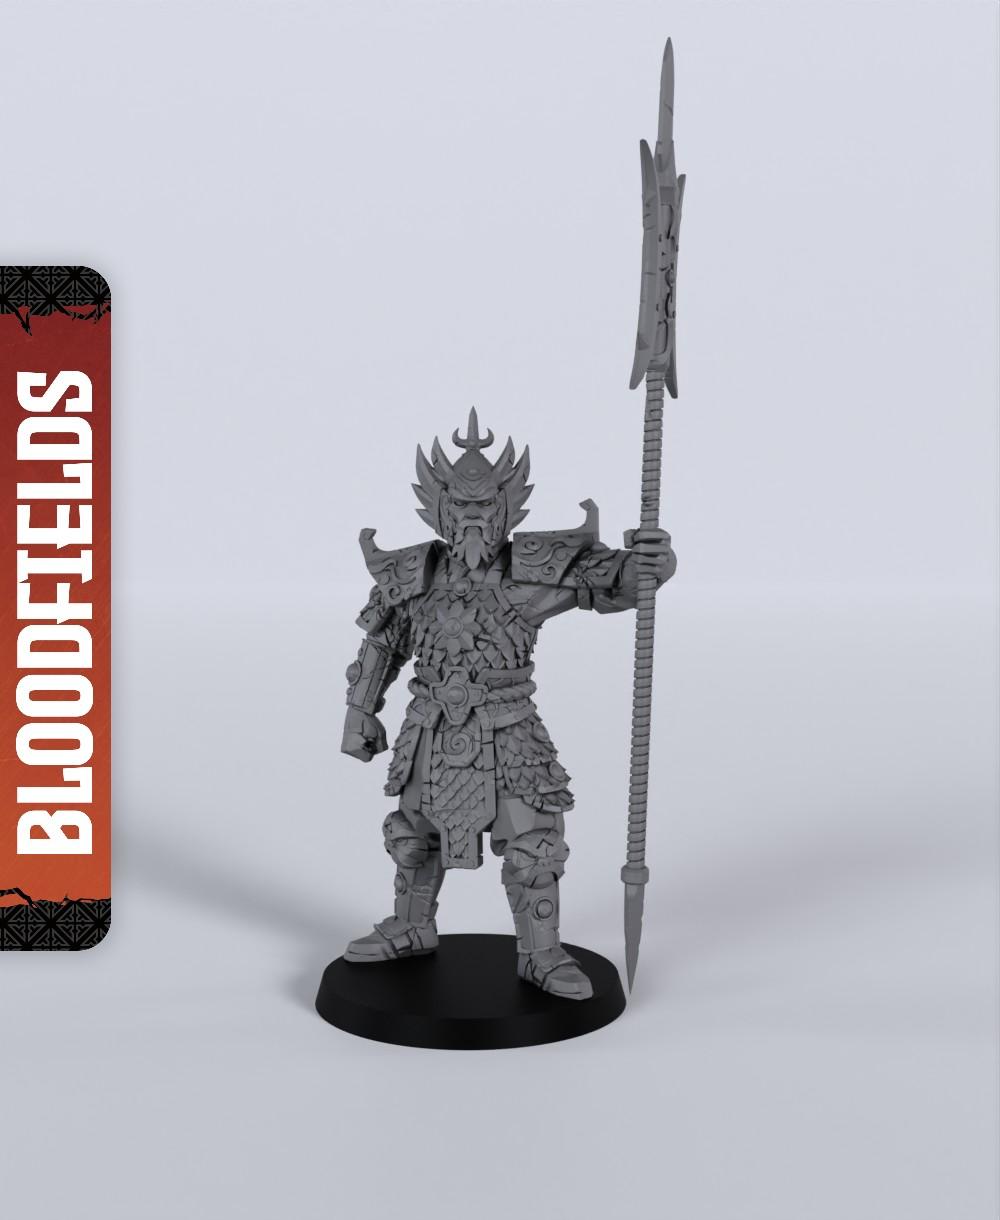 Terracotta Giant - With Free Dragon Warhammer - 5e DnD Inspired for RPG and Wargamers 3d model